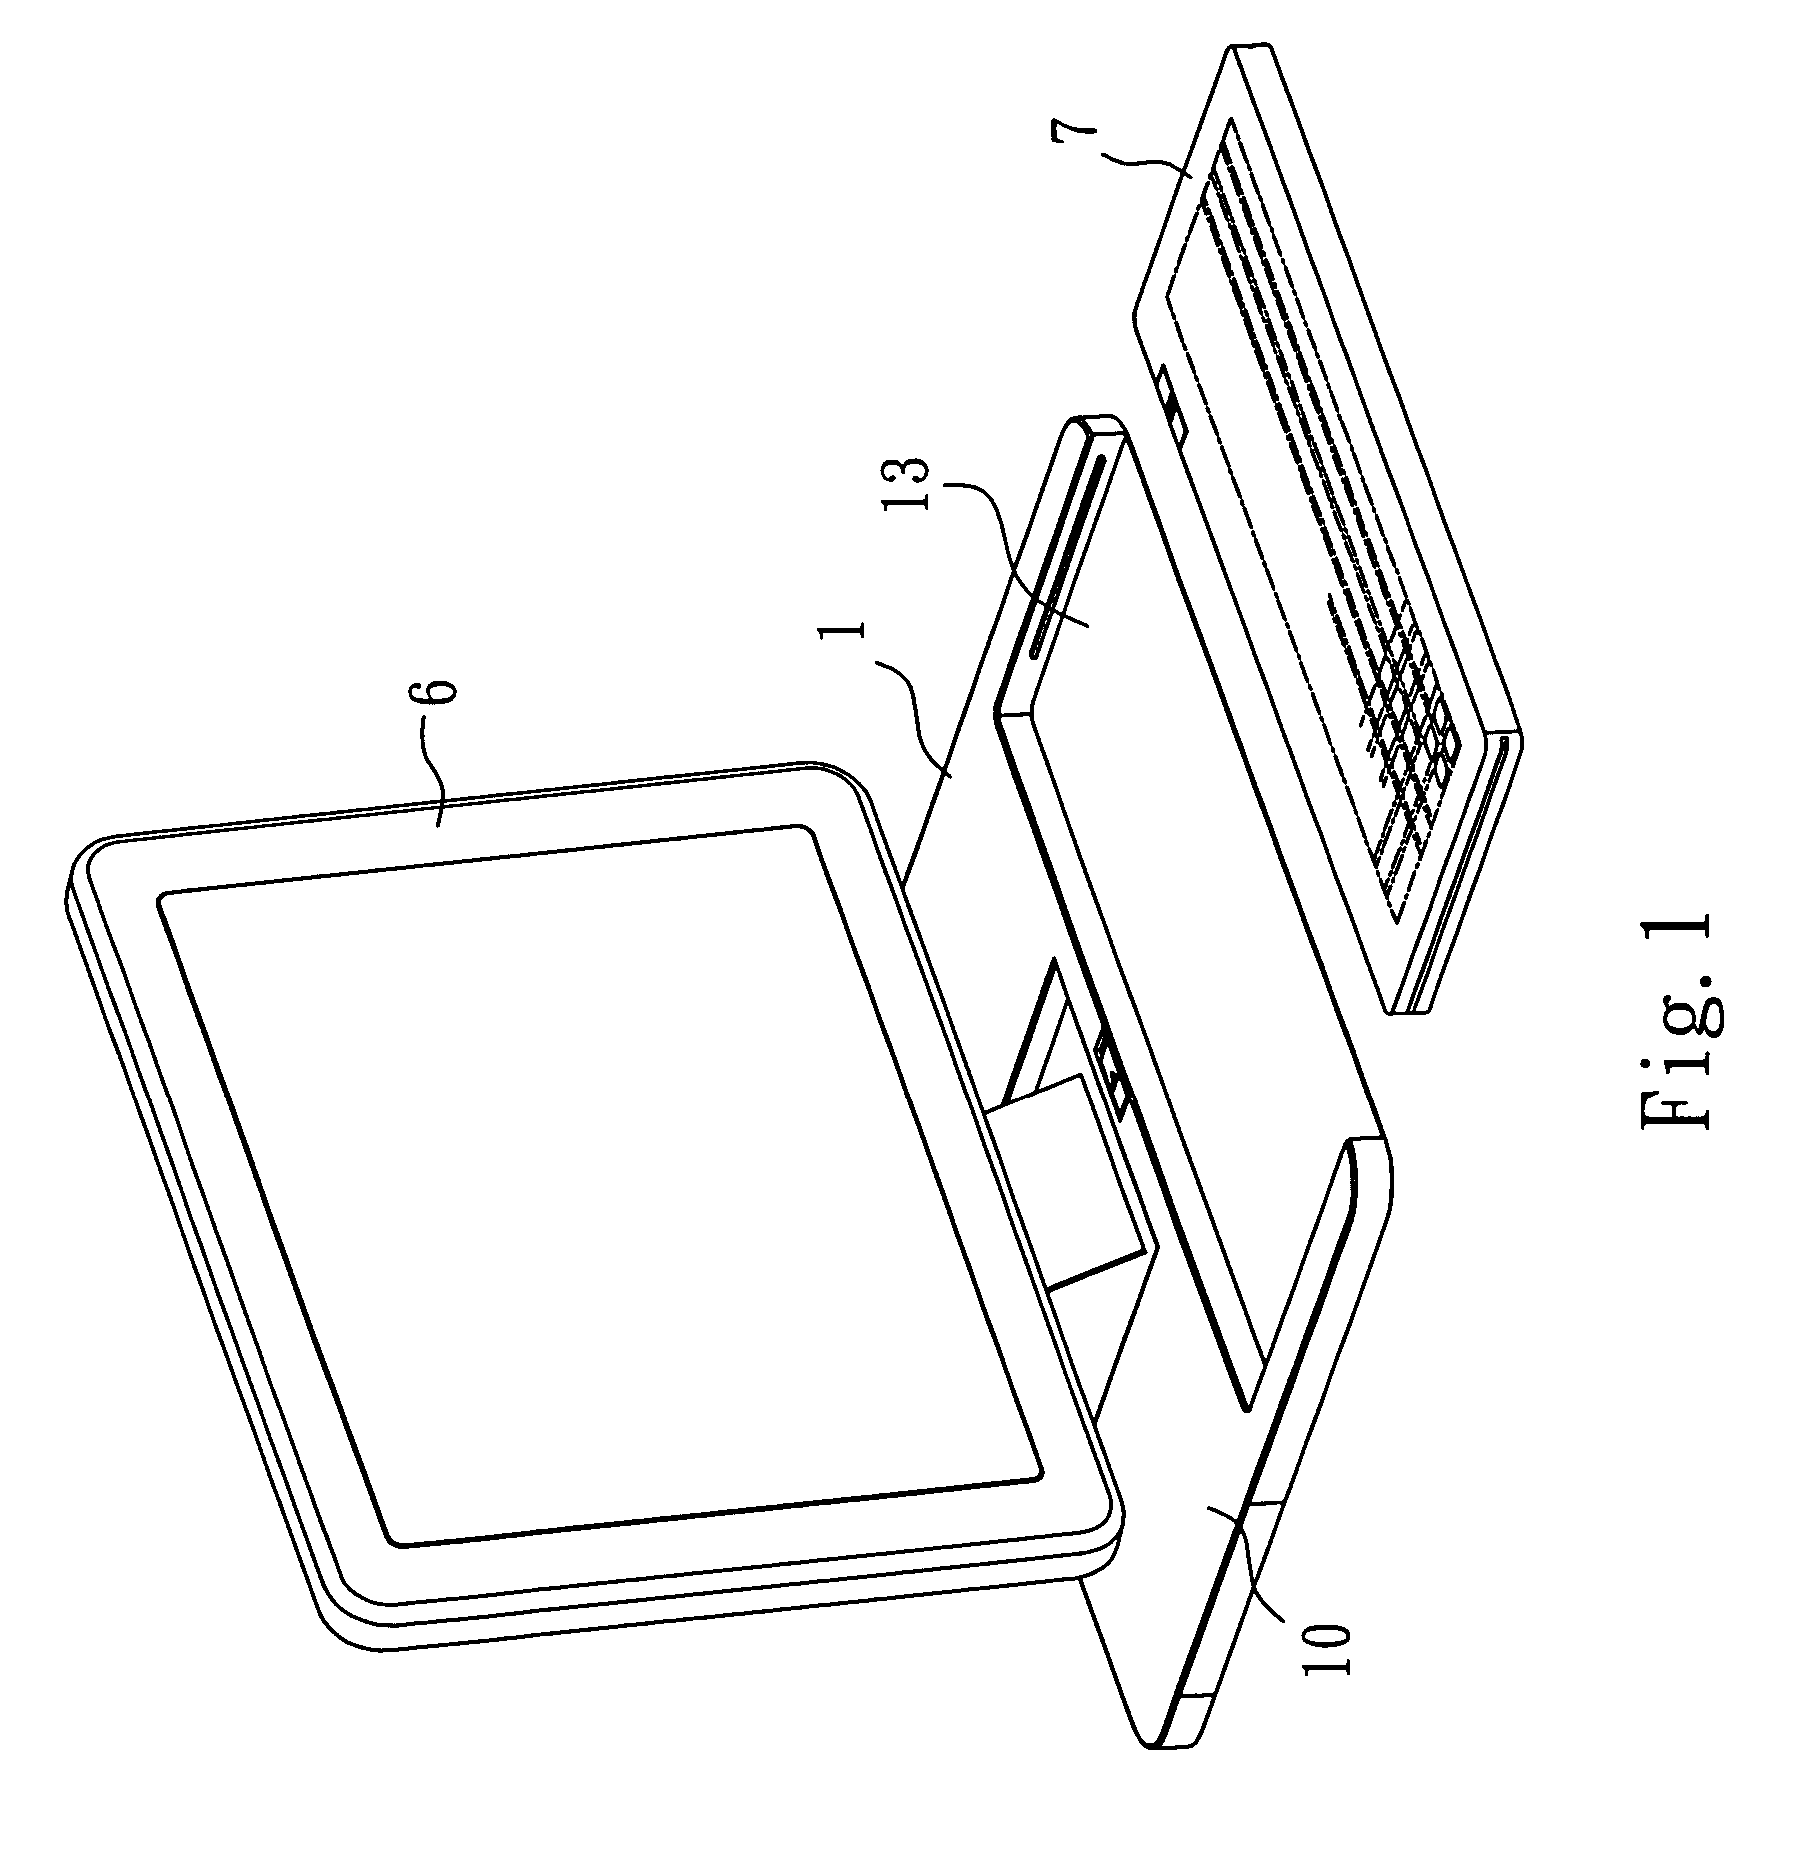 Portable computer support structure